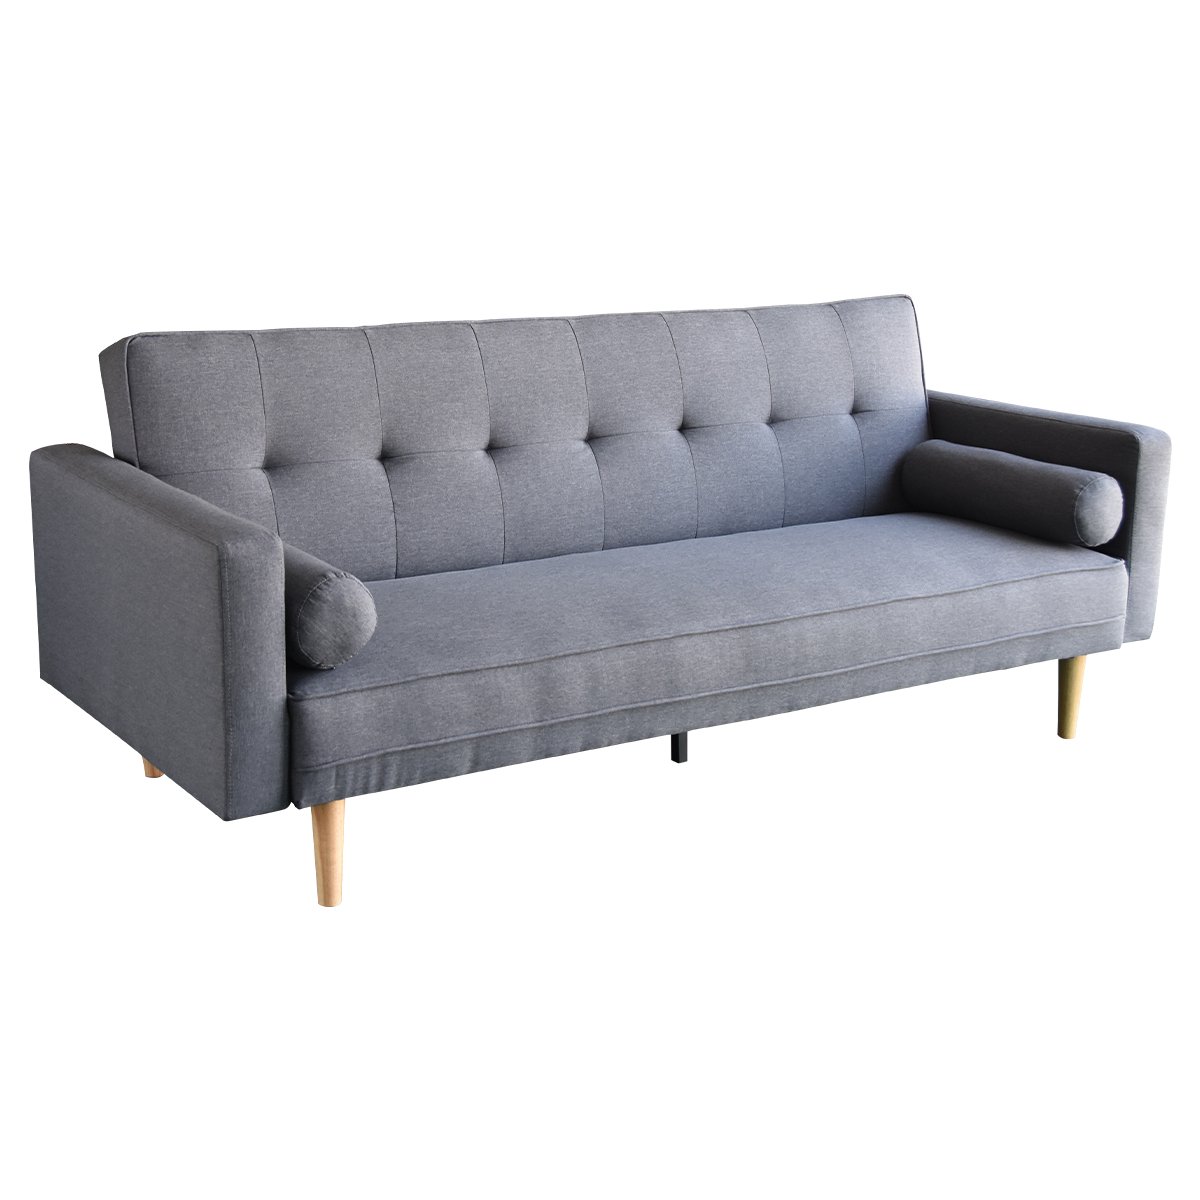 Sarantino 3 Seater Linen Sofa Bed Couch with Pillows - Dark Grey 1